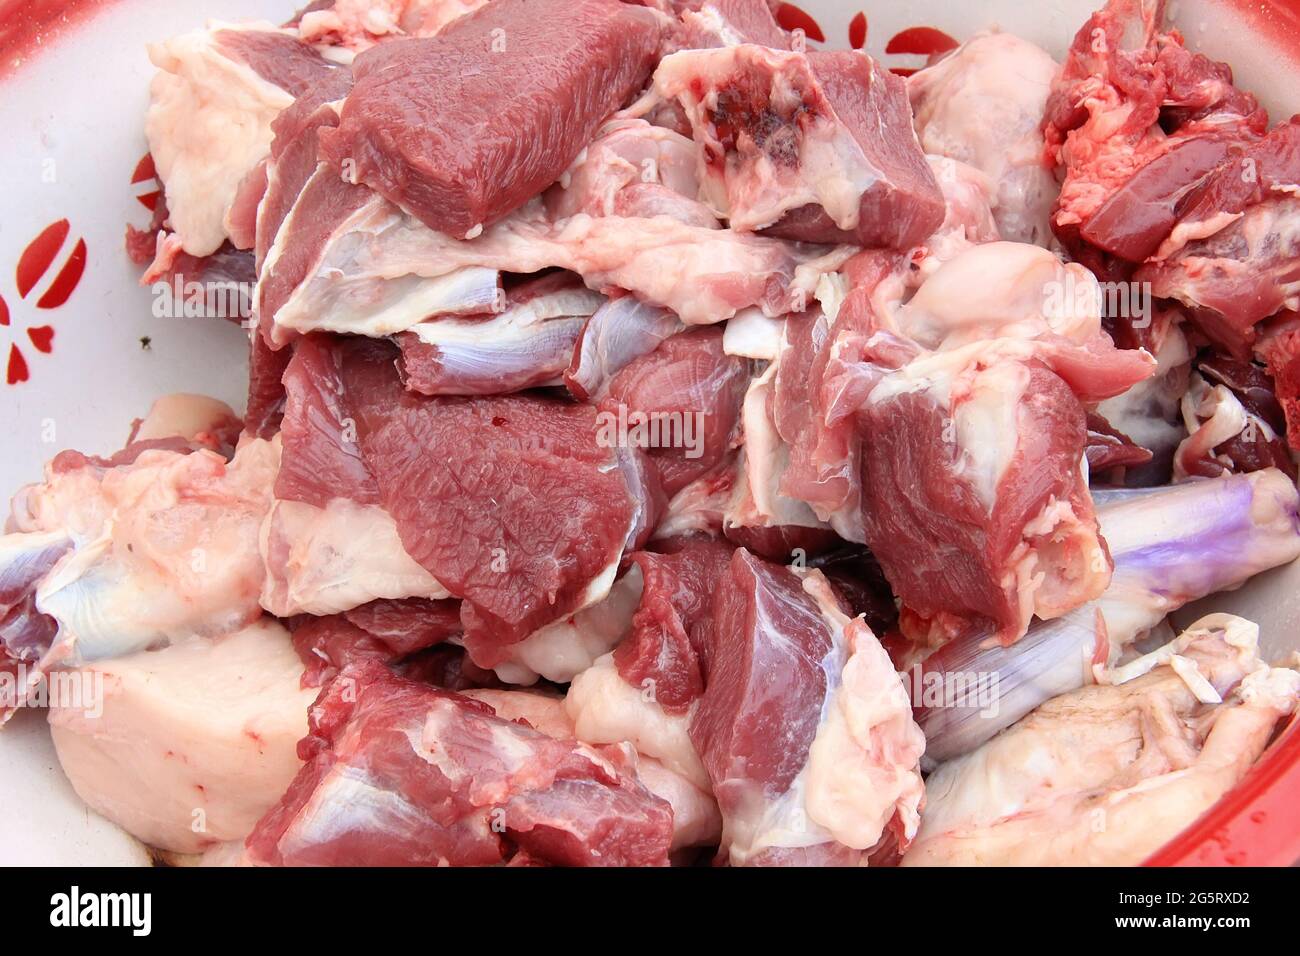 https://c8.alamy.com/comp/2G5RXD2/raw-lamb-meat-cut-into-large-pieces-and-lamb-fat-in-a-cup-close-up-2G5RXD2.jpg